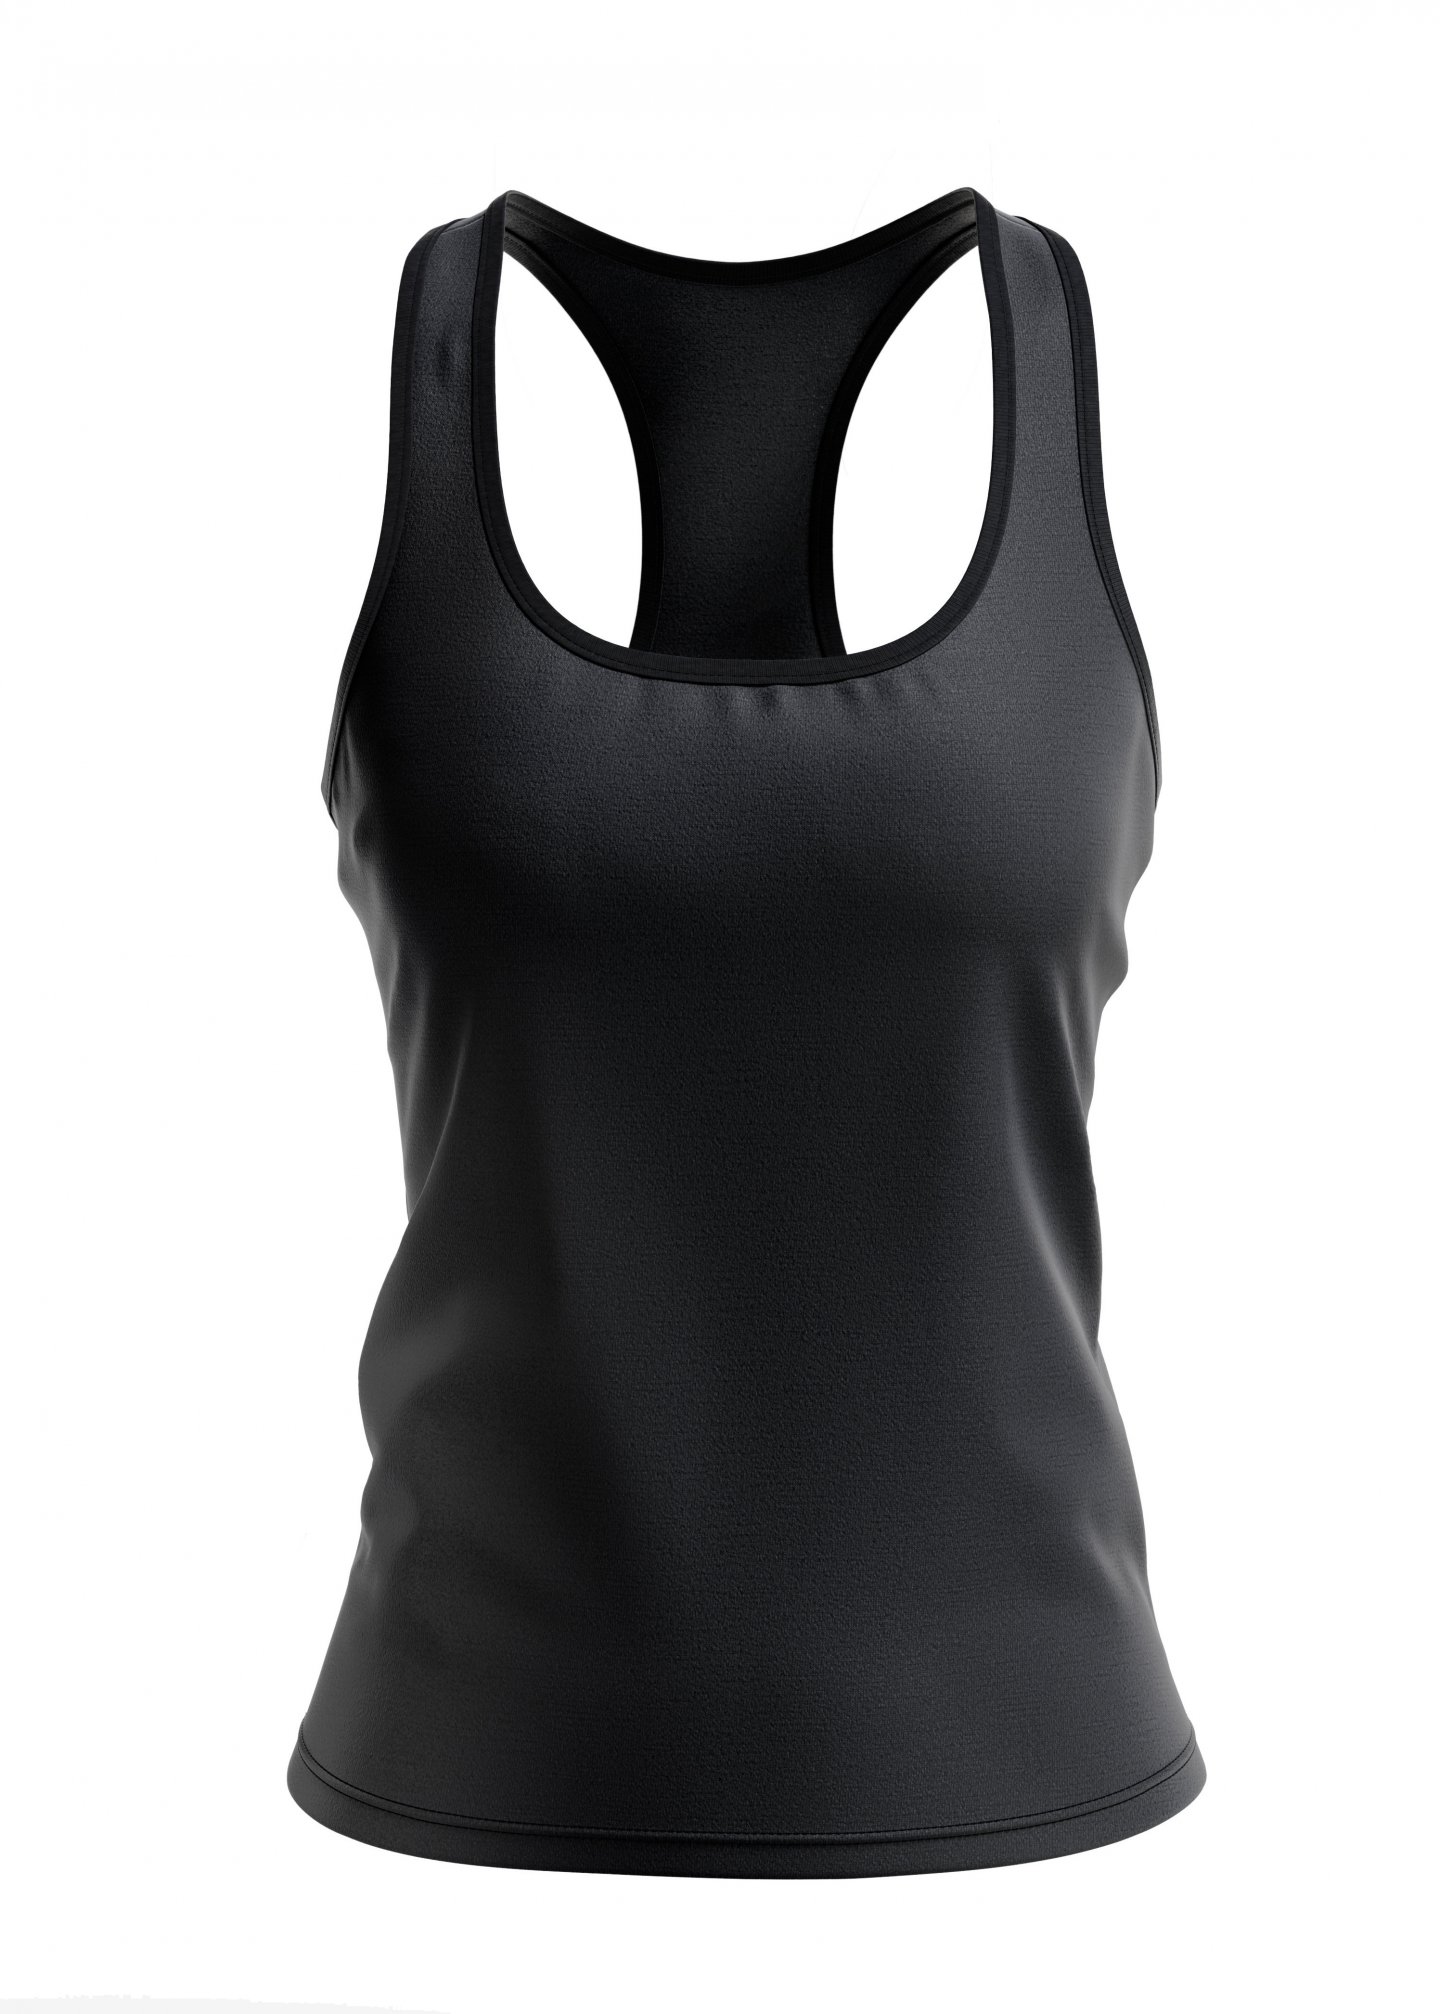 Women Workout Crop Top Built in Bra Ribbed Athletic Tank Tops Casual  Sleeveless Collar Shirts Padded Sports Yoga Vest